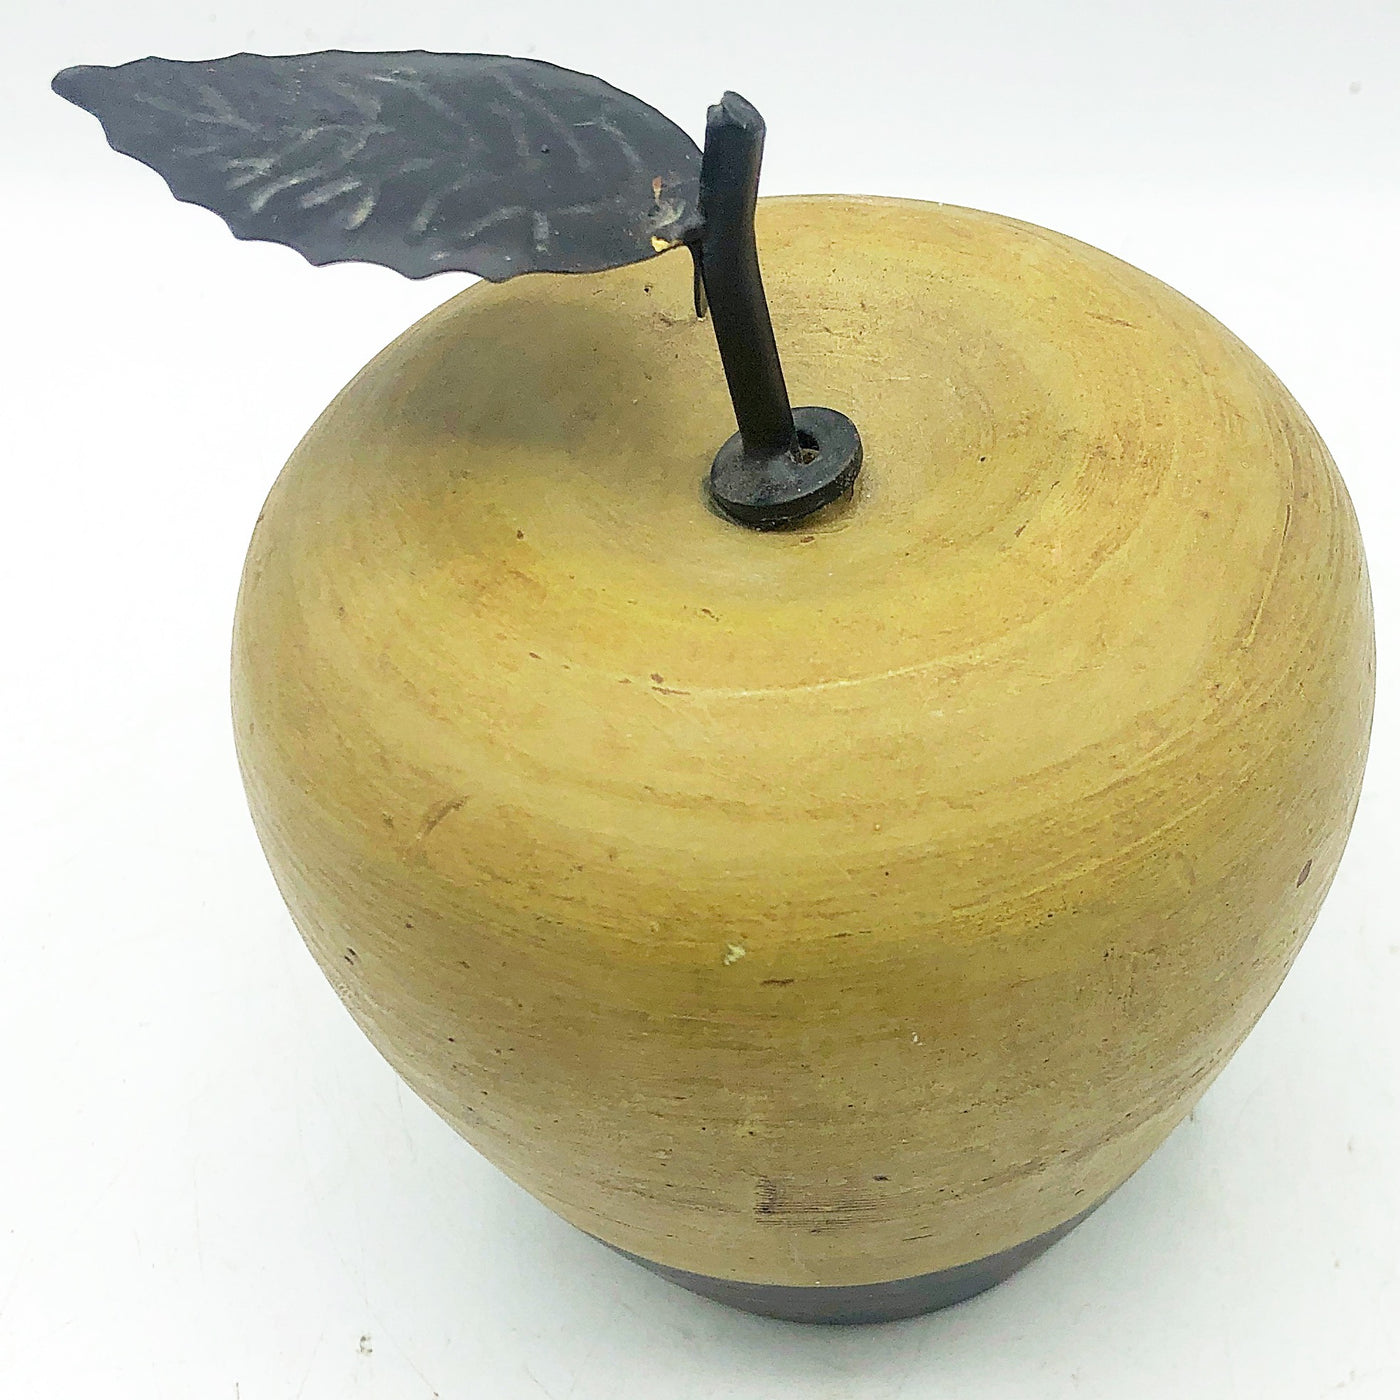 Surprise Me Sale 🤭 Rustic Two Toned Apple with Metal Leaf